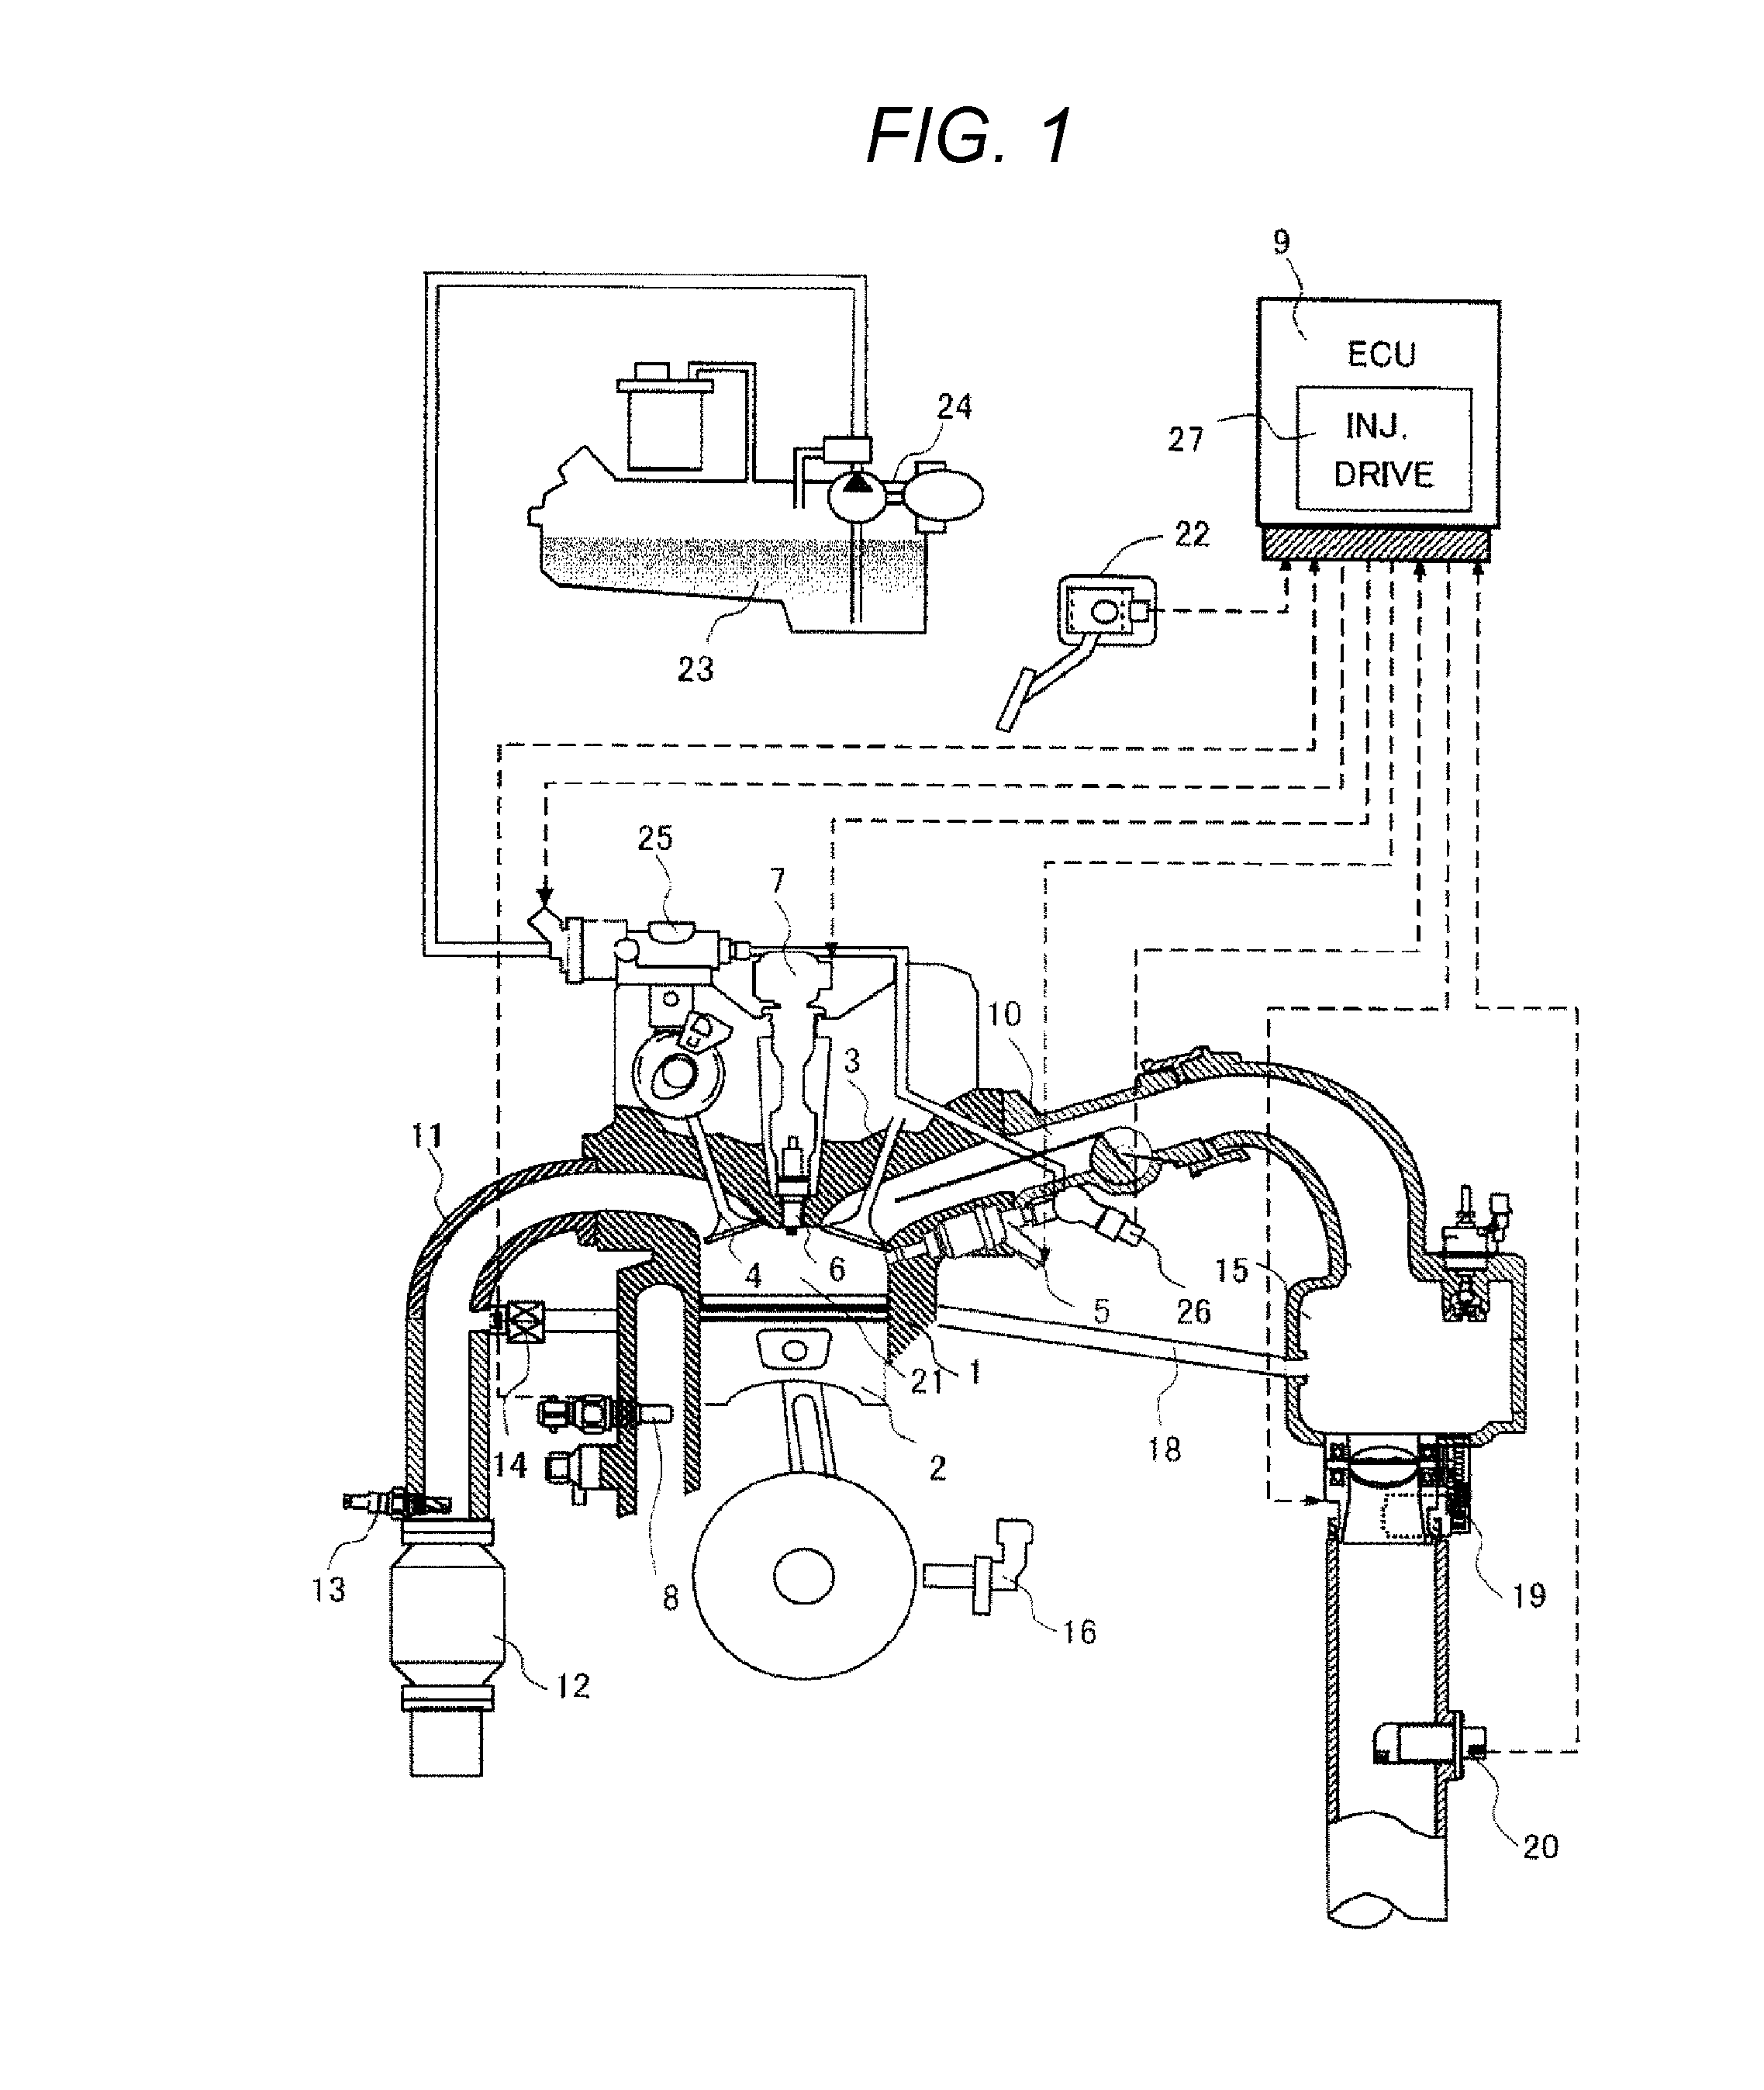 Control device for internal combustion engine